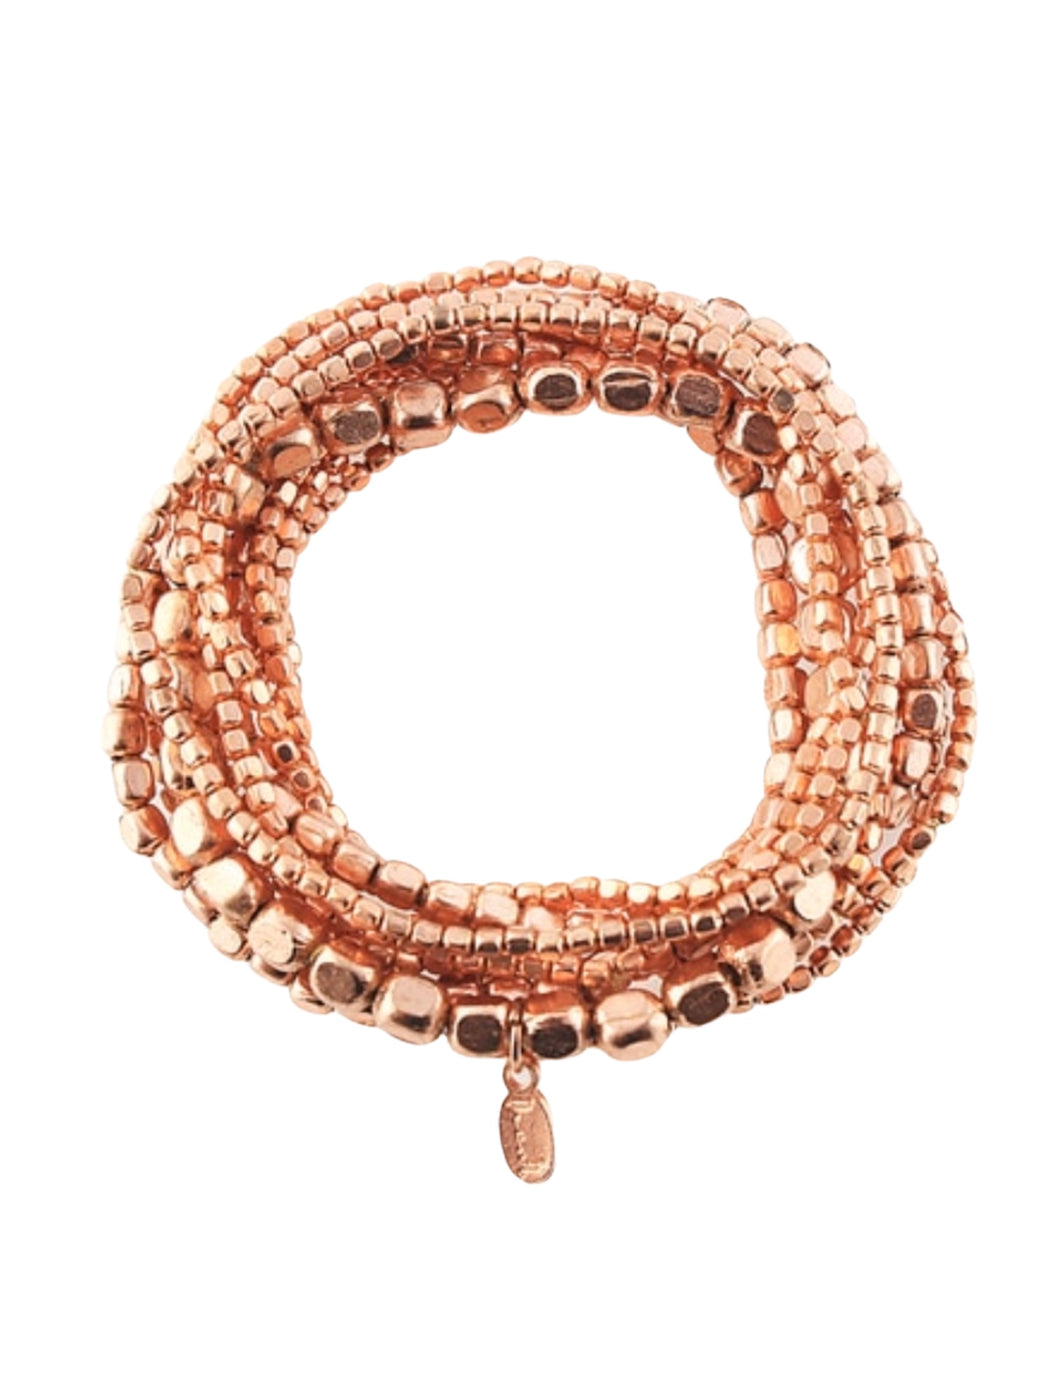 Copper Layered Beaded Bracelet With Accent Charm